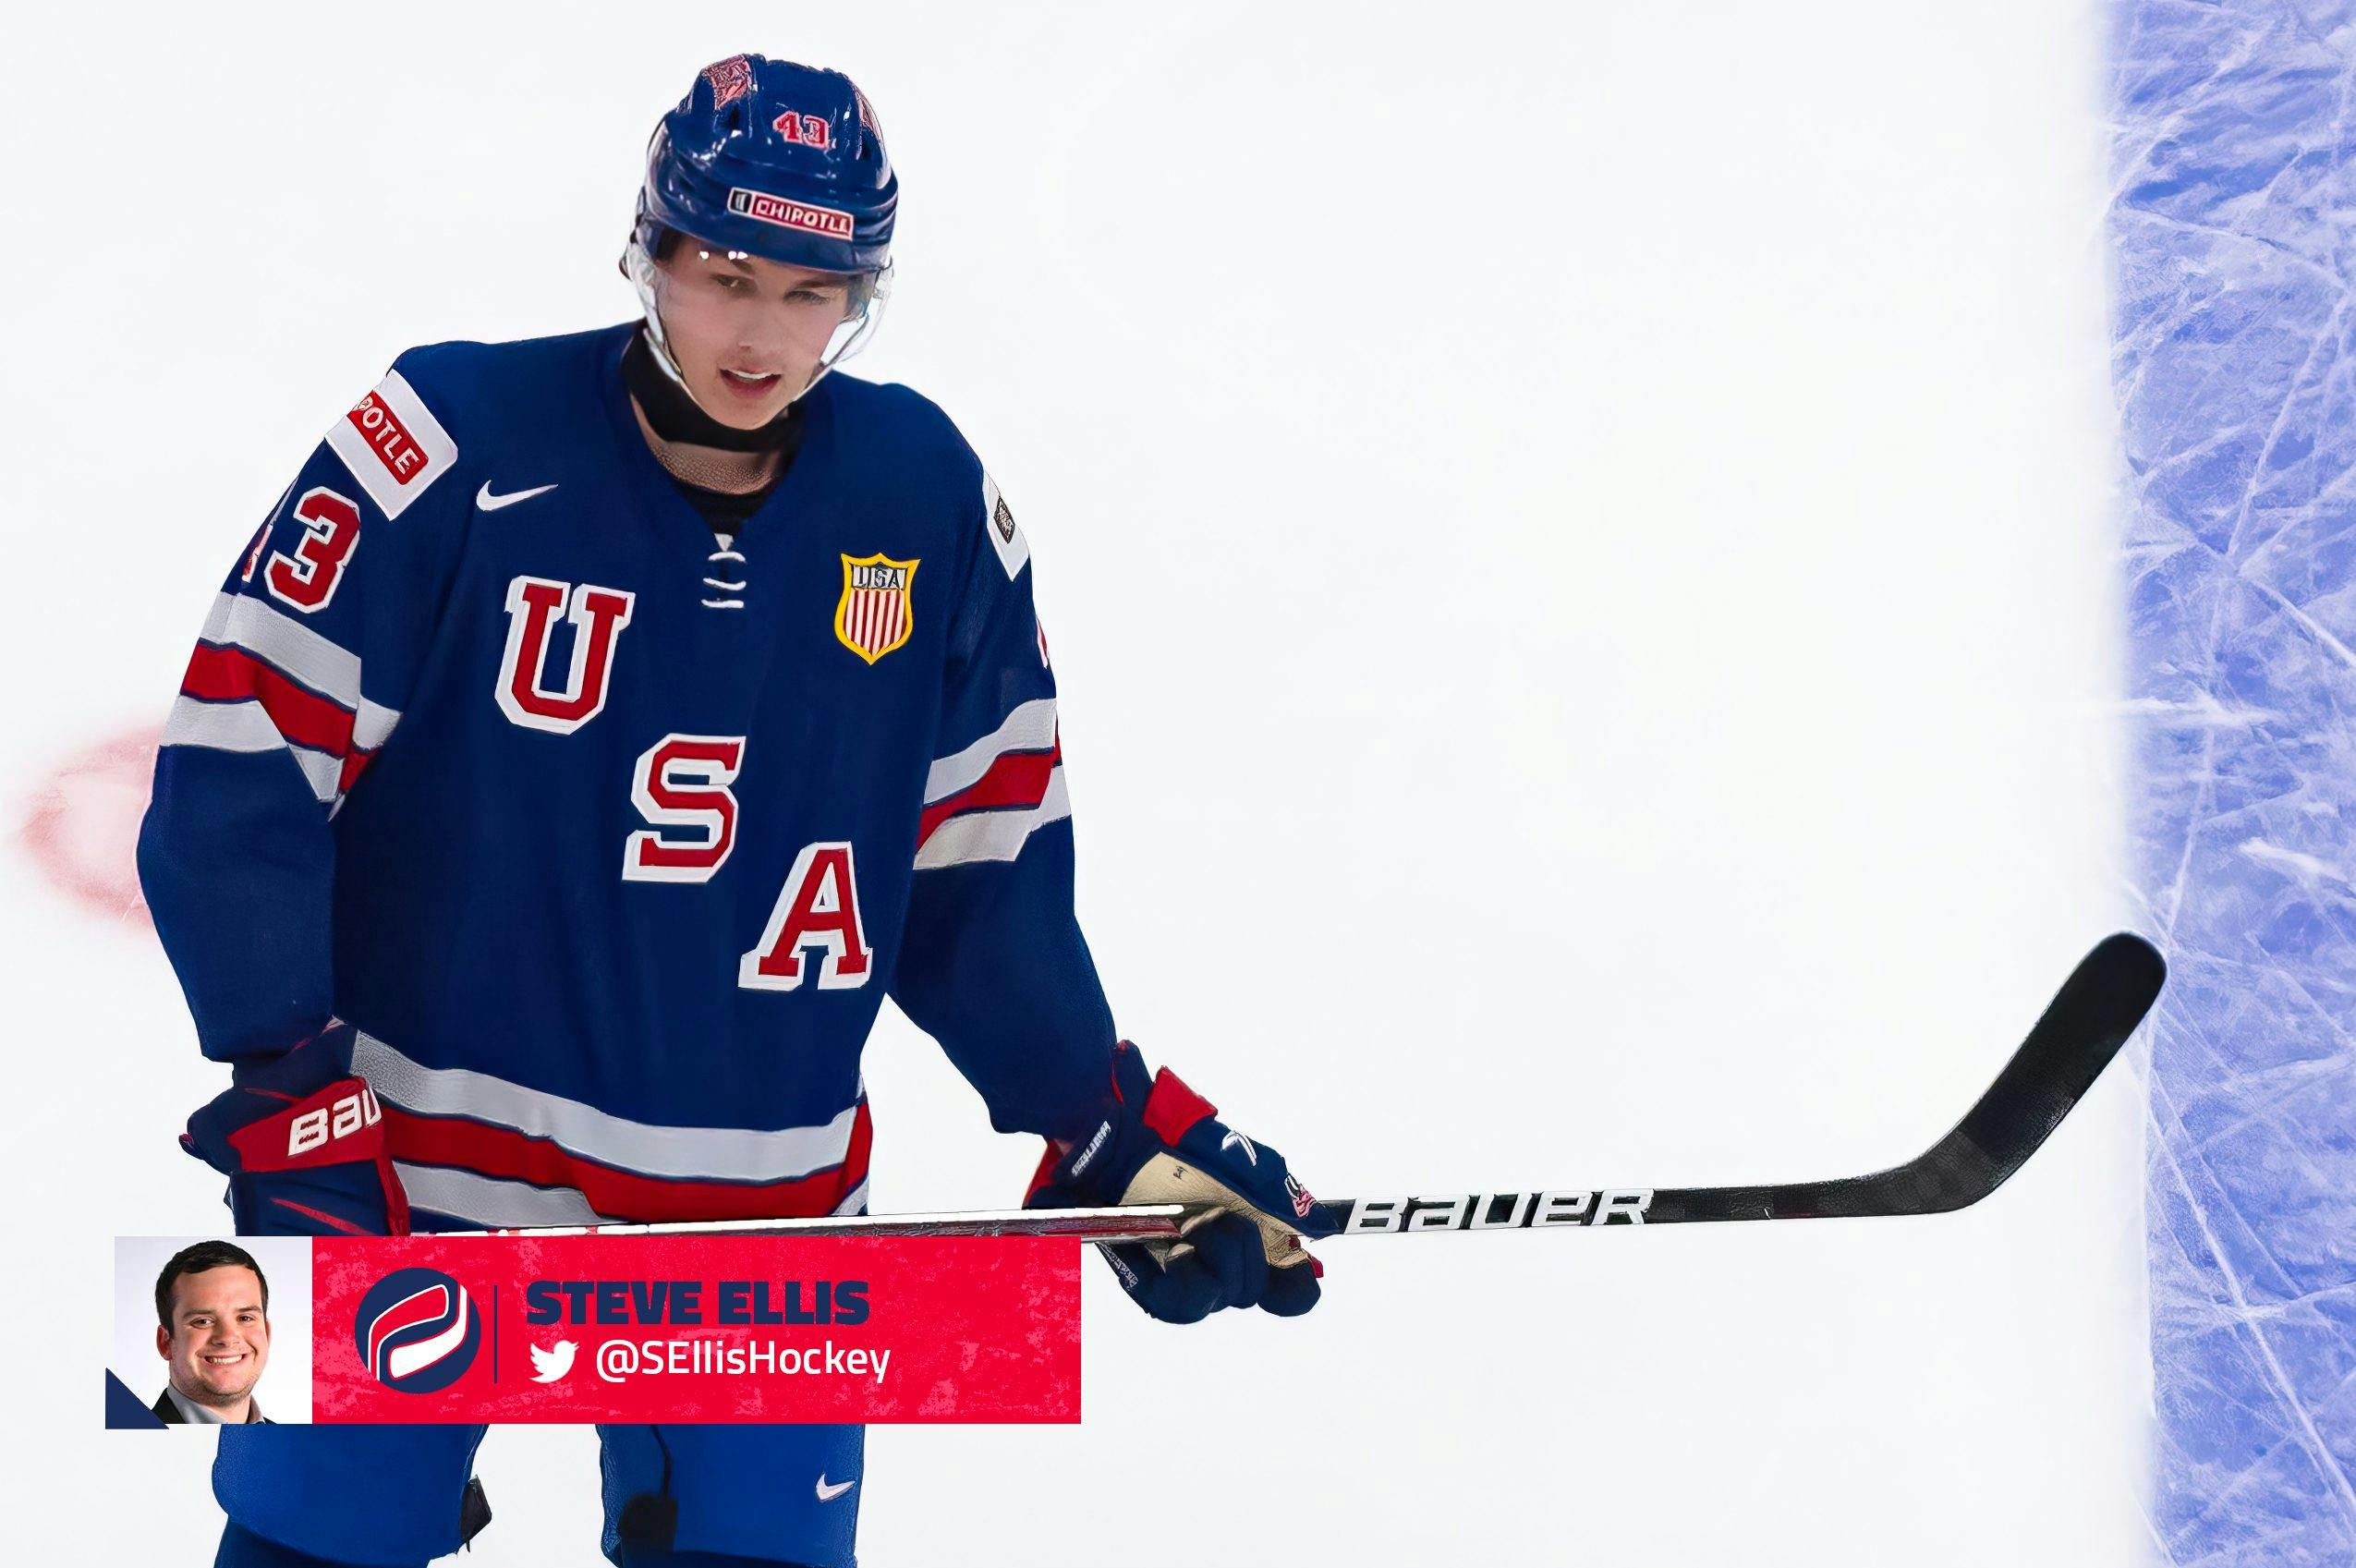 Jack Hughes has best game in Team USA elimination at Worlds